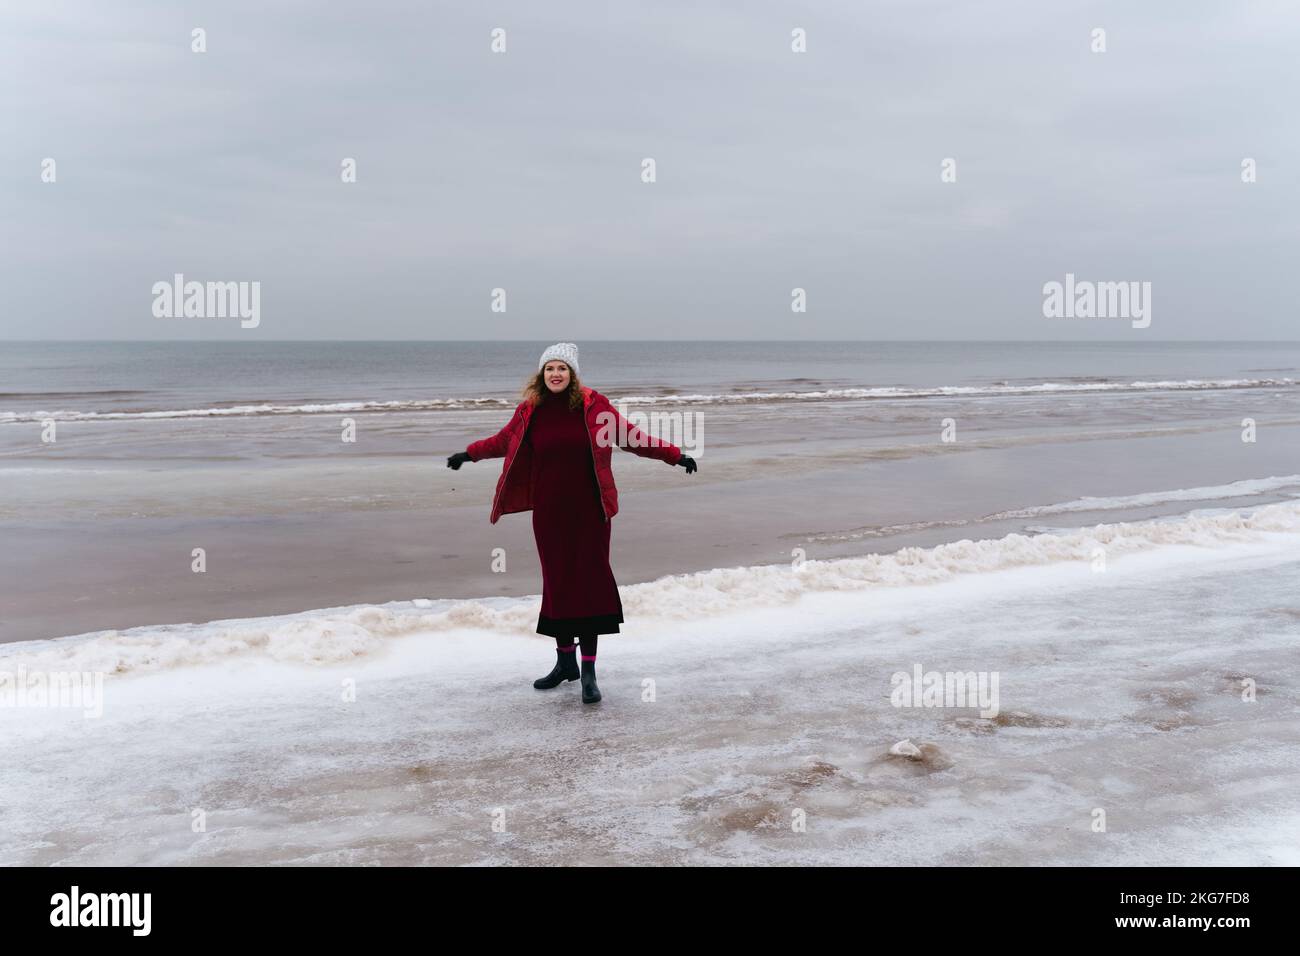 A joyful woman in a red jacket and a dress by the sea in winter. Stock Photo